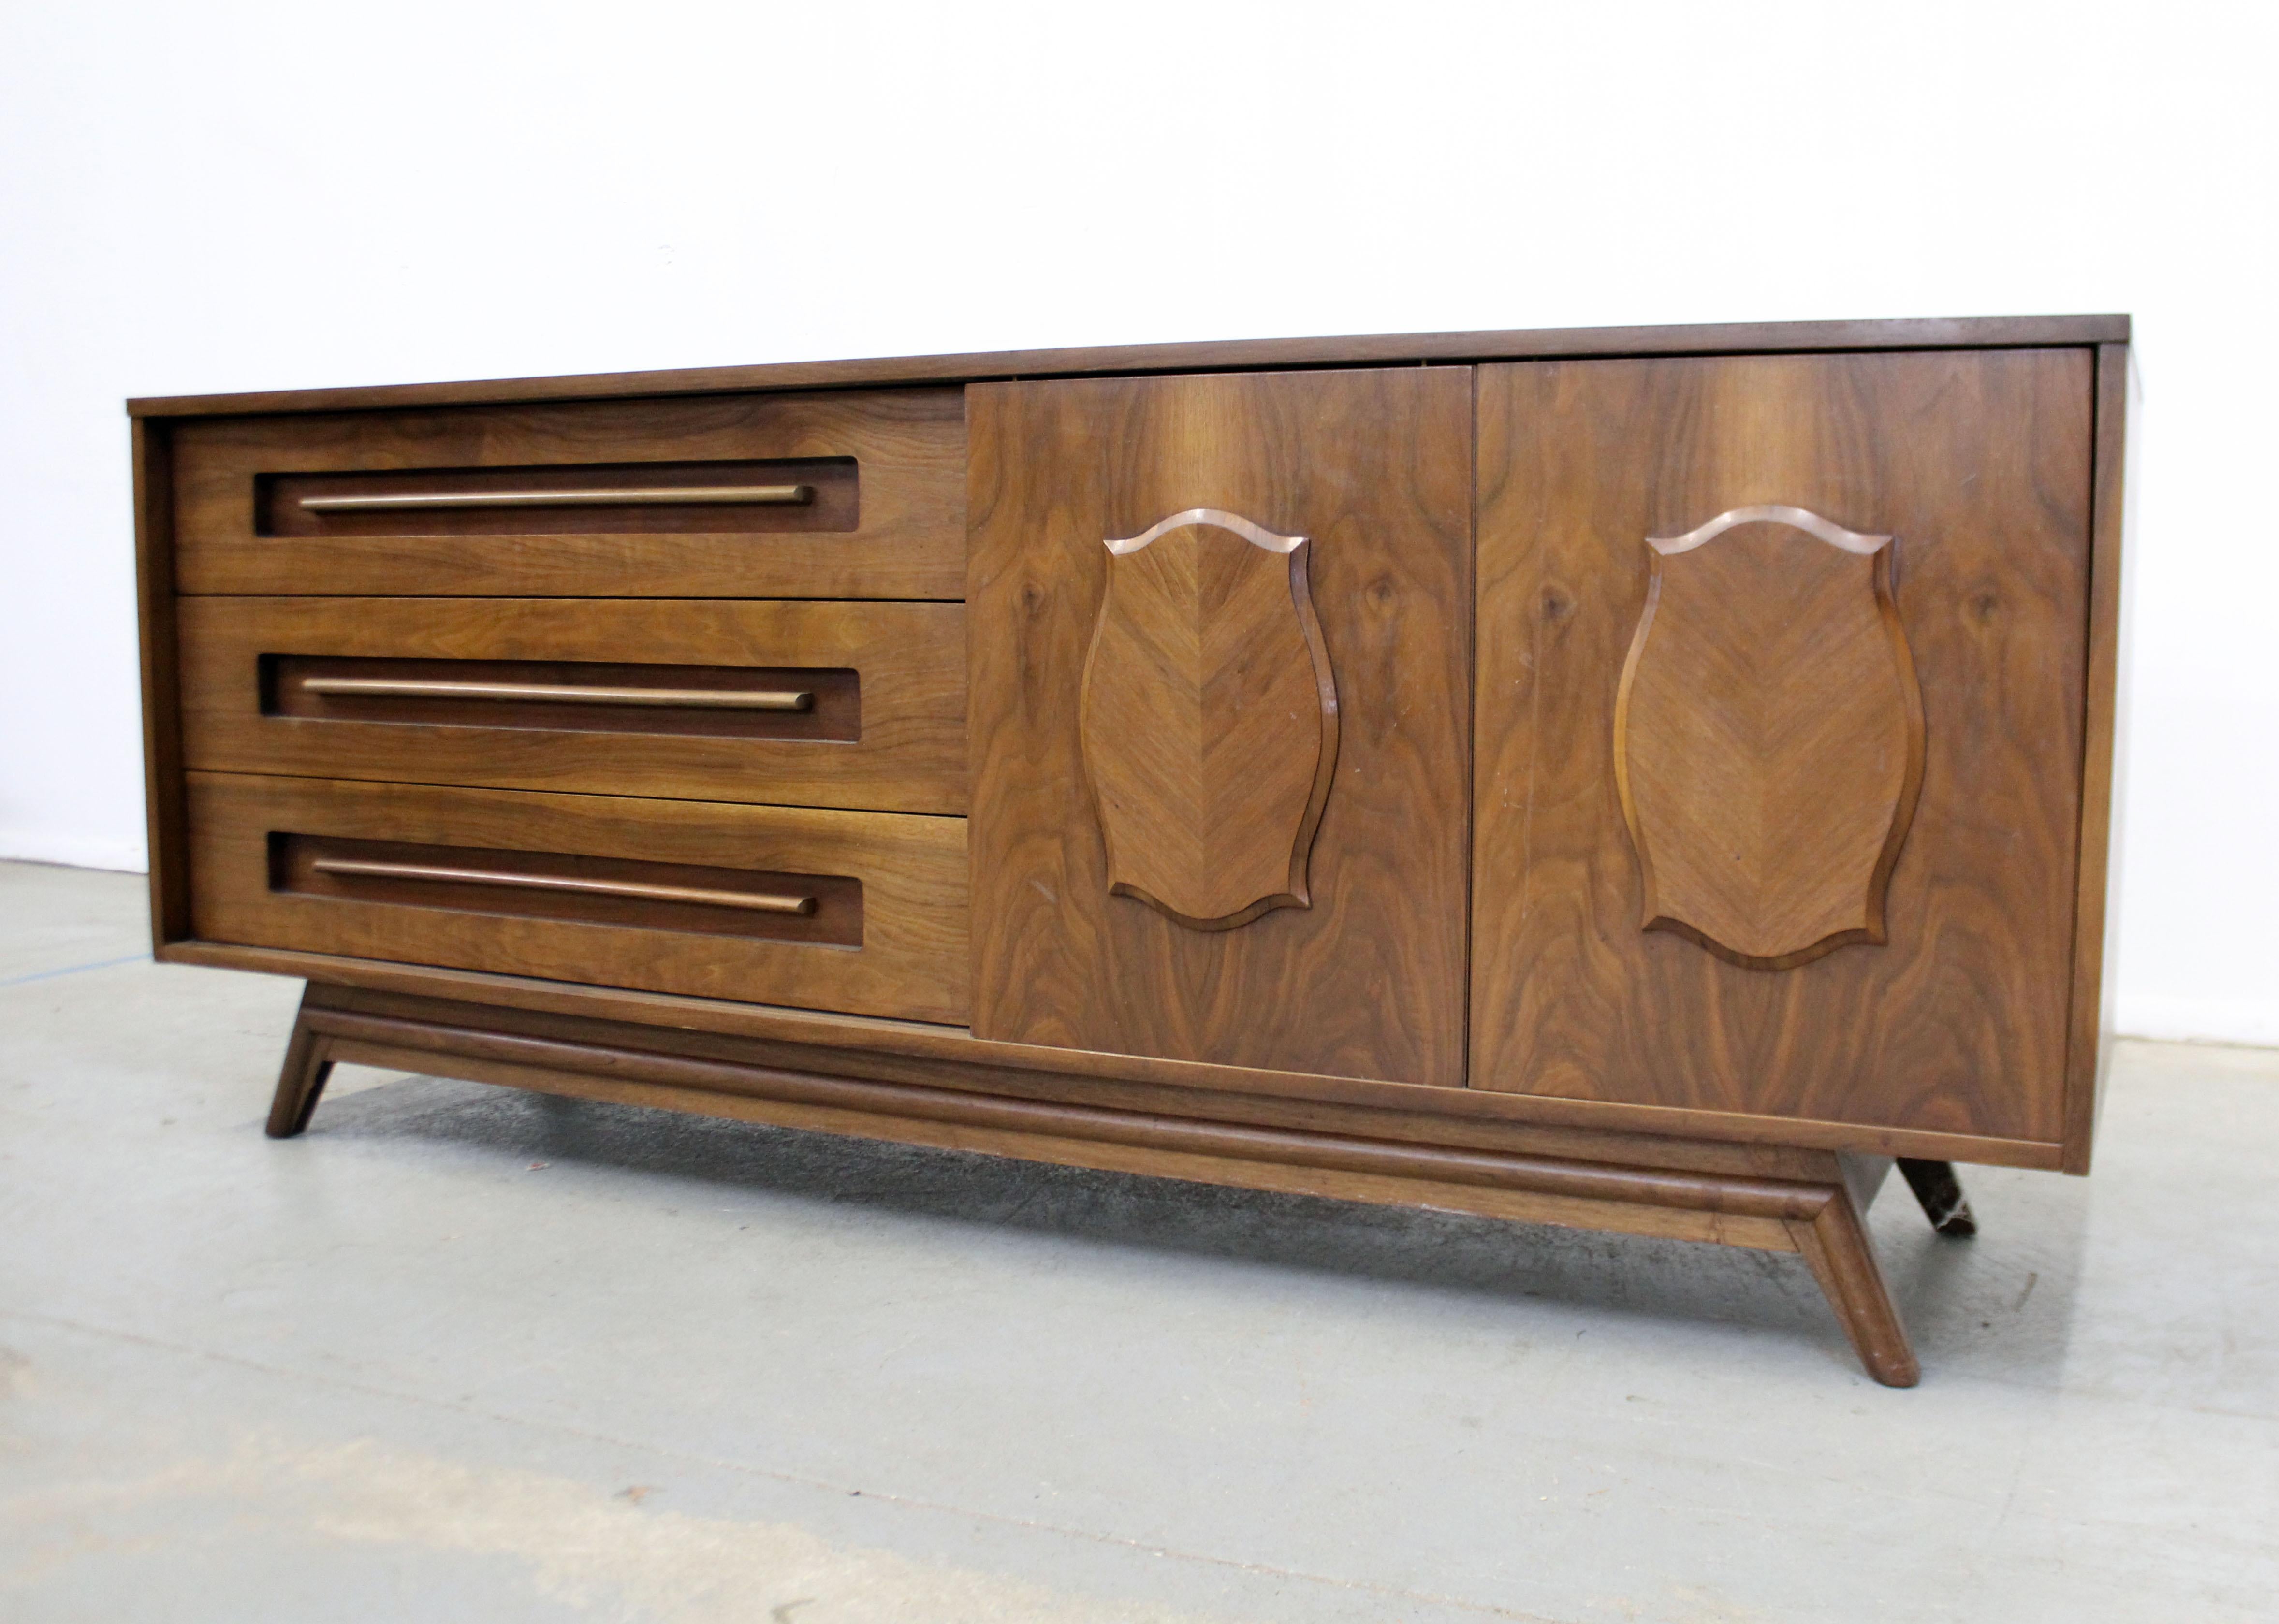 Offered is an exceptional mid-century modern credenza sure to impress anyone who sees it. It is made of walnut, featuring 2 parqueted sliding doors with 9 drawers. It is in good vintage condition, showing some wear, including surface scratches,